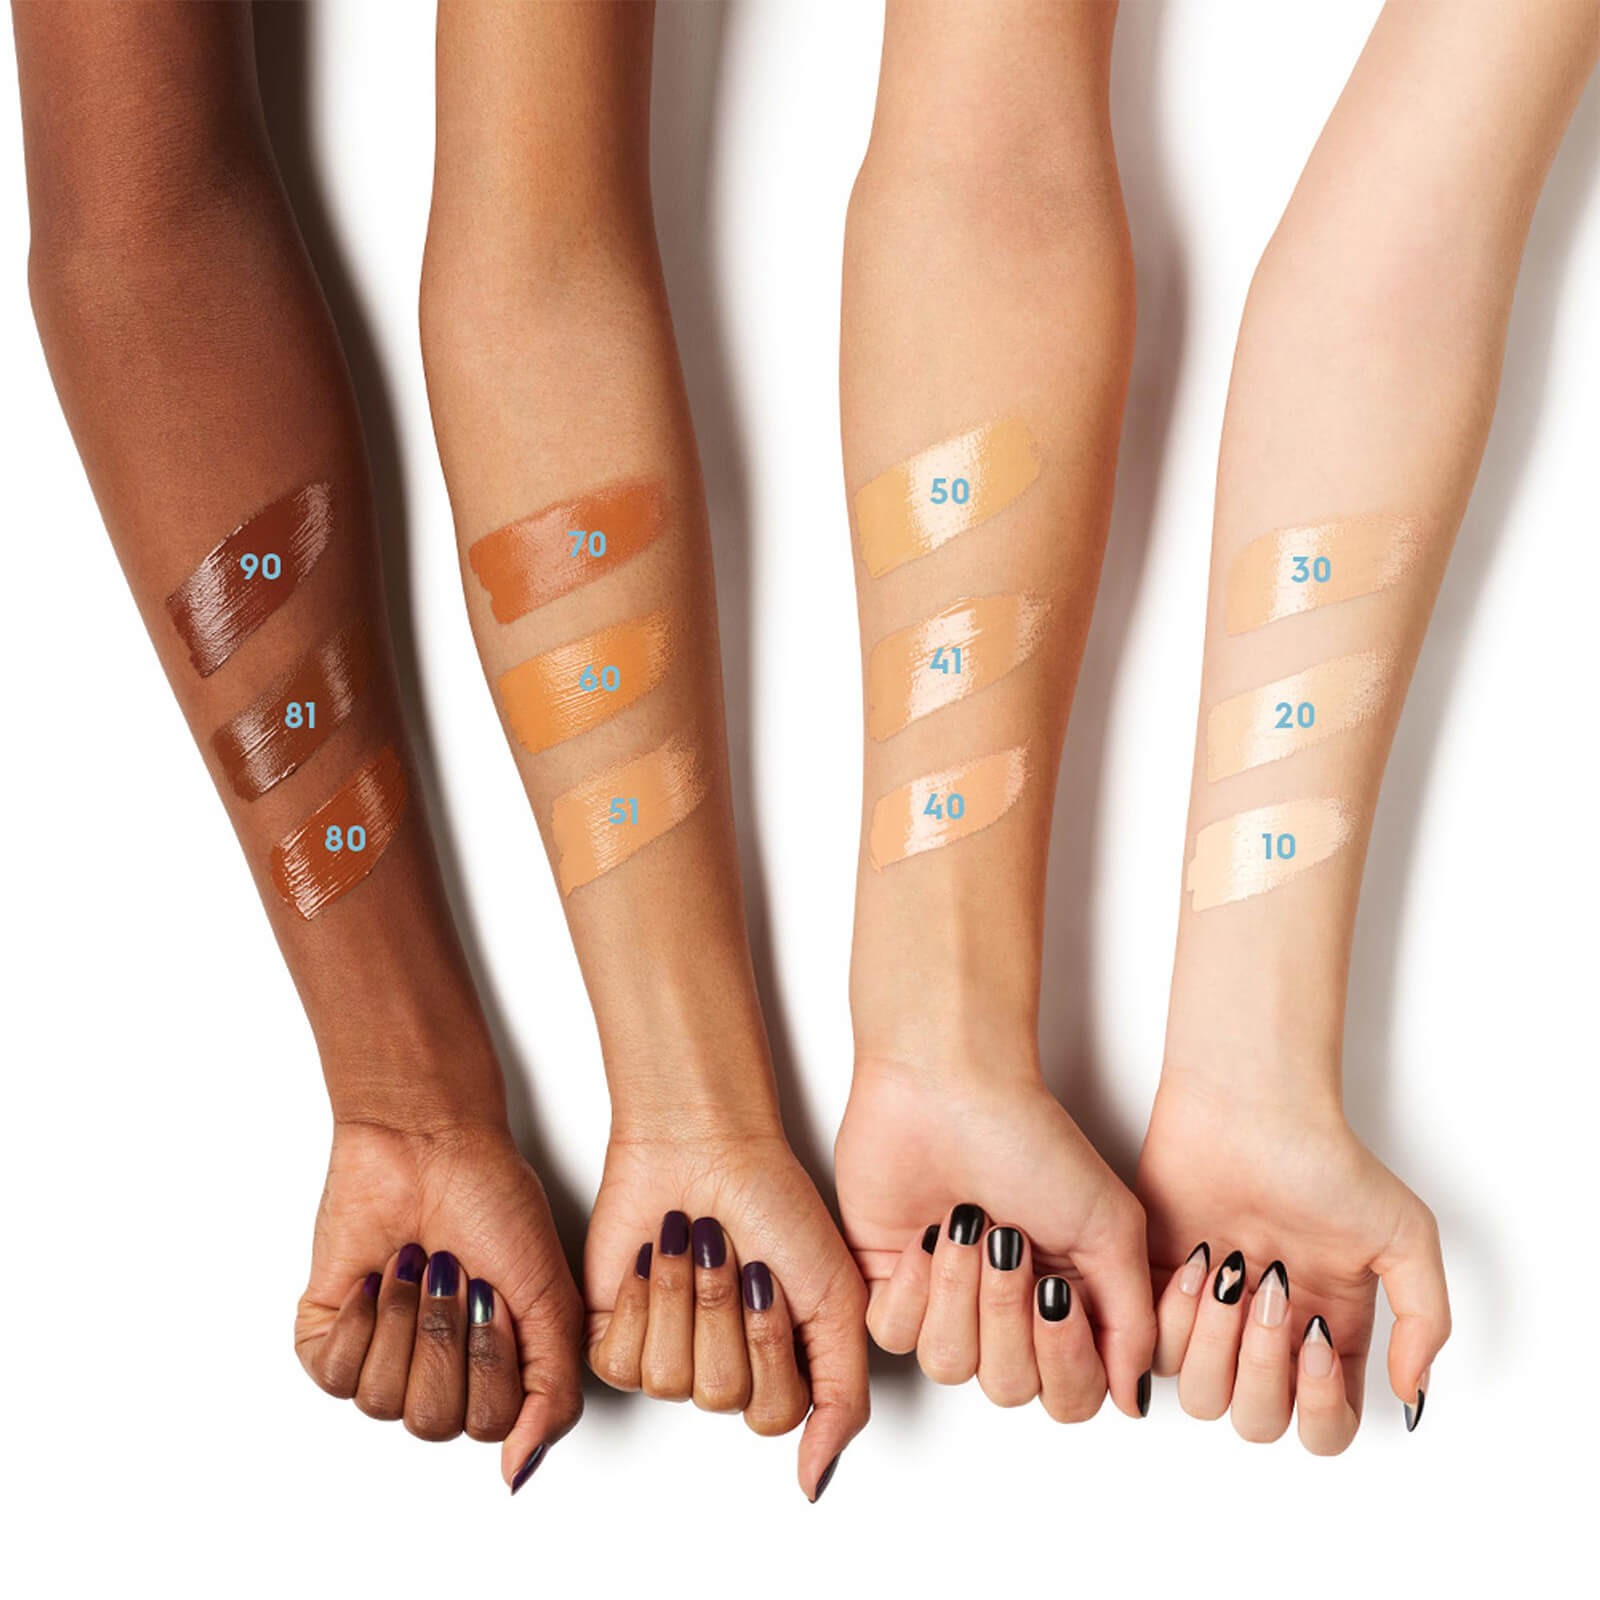 Image showing the different shades across four different skin tones dark to light. Text- 90,81,80 70,60,51, 50,41,40, 30,20,10